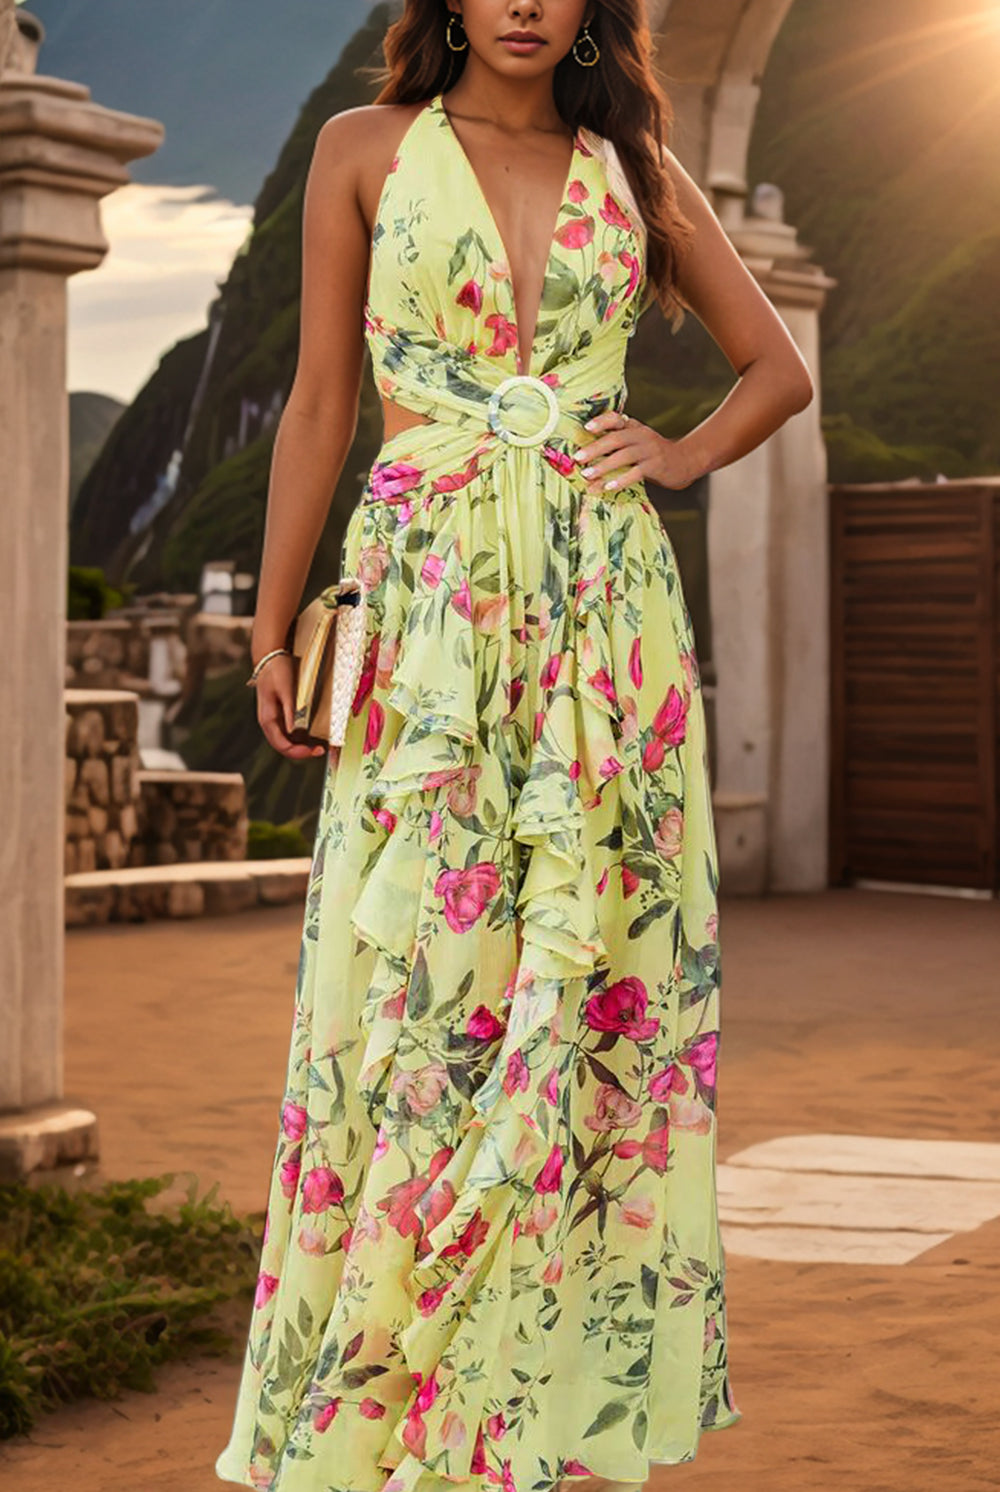 A woman stands poised against a sunset backdrop, wearing an elegant sleeveless maxi dress adorned with a vibrant floral pattern in shades of pink and green. The dress features a plunging neckline, cinched waist with a decorative ring detail, and a flowing ruffled skirt, embodying a graceful summer evening aesthetic.